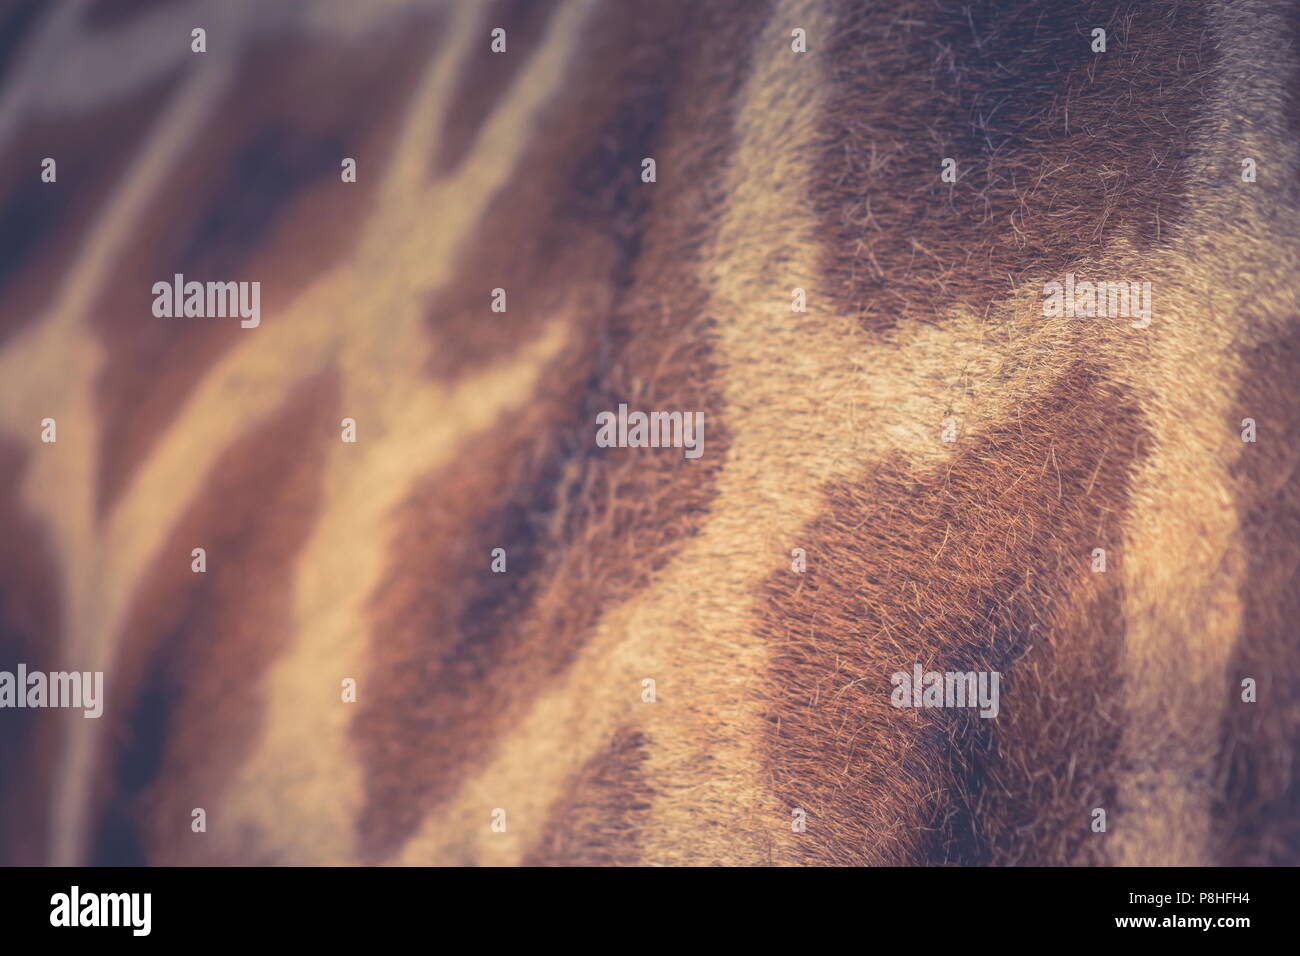 Close up background  image of the patterning of a Giraffe Stock Photo